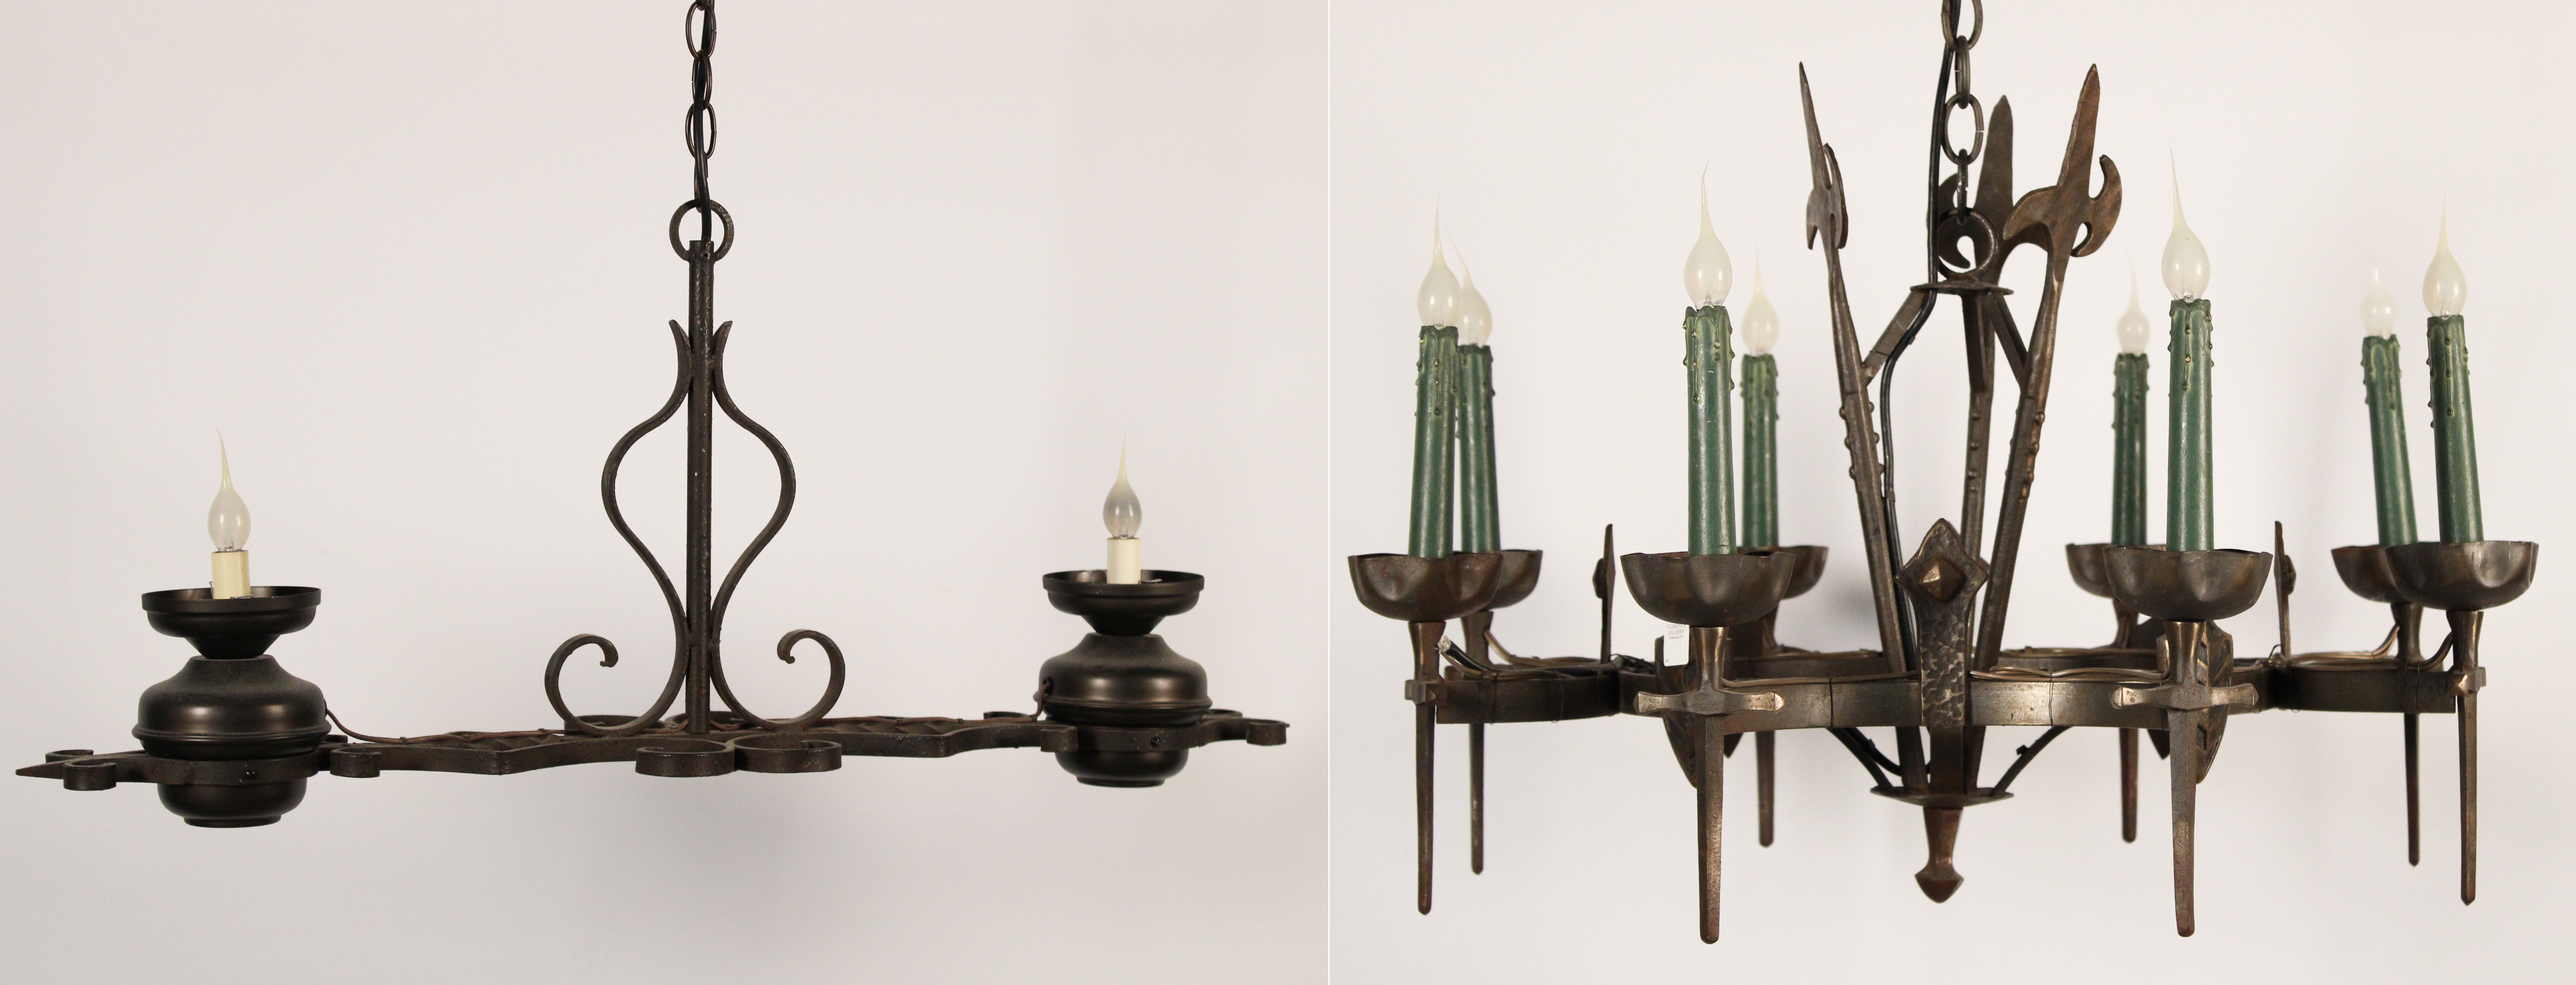 2 MEDIEVAL STYLE IRON CHANDELIERS